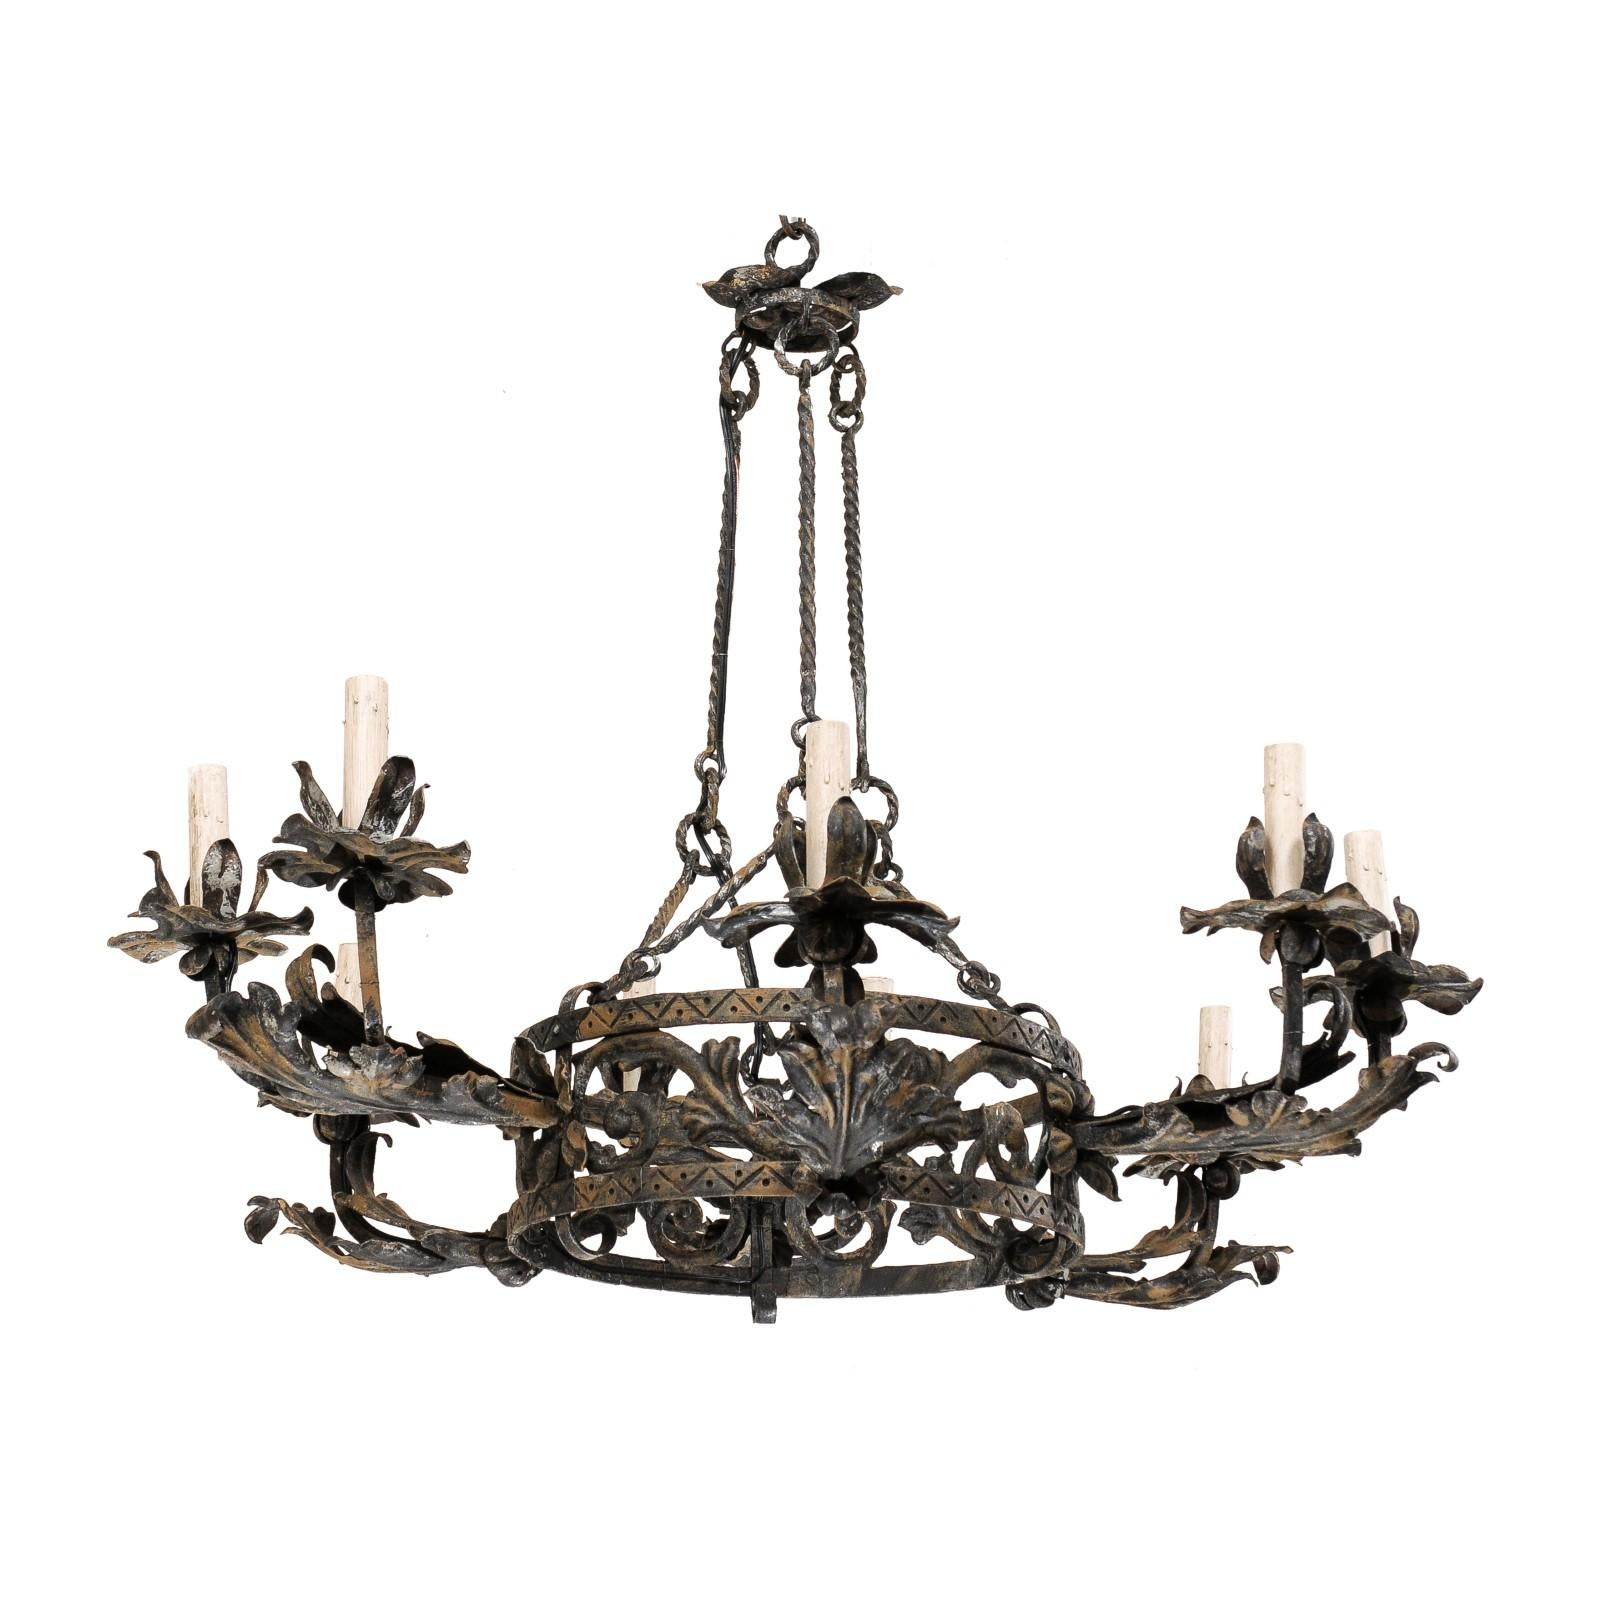 Italian Nine-Light Forged-Iron Chandelier in Foliage Motif, Re-Wired for USA